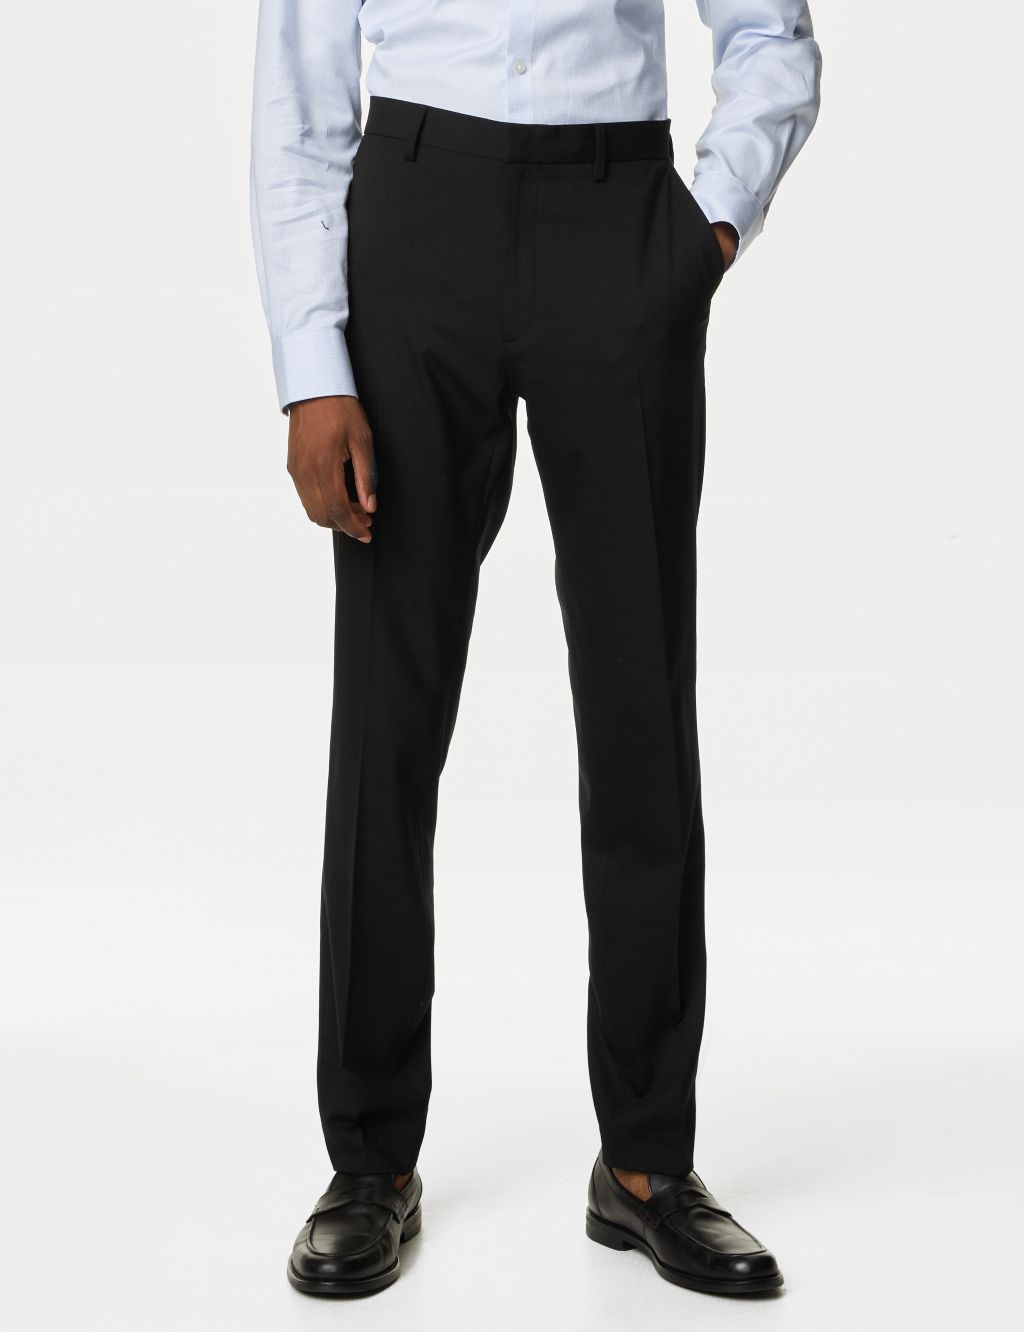 Wool Blend Flat Front Stretch Trousers image 4